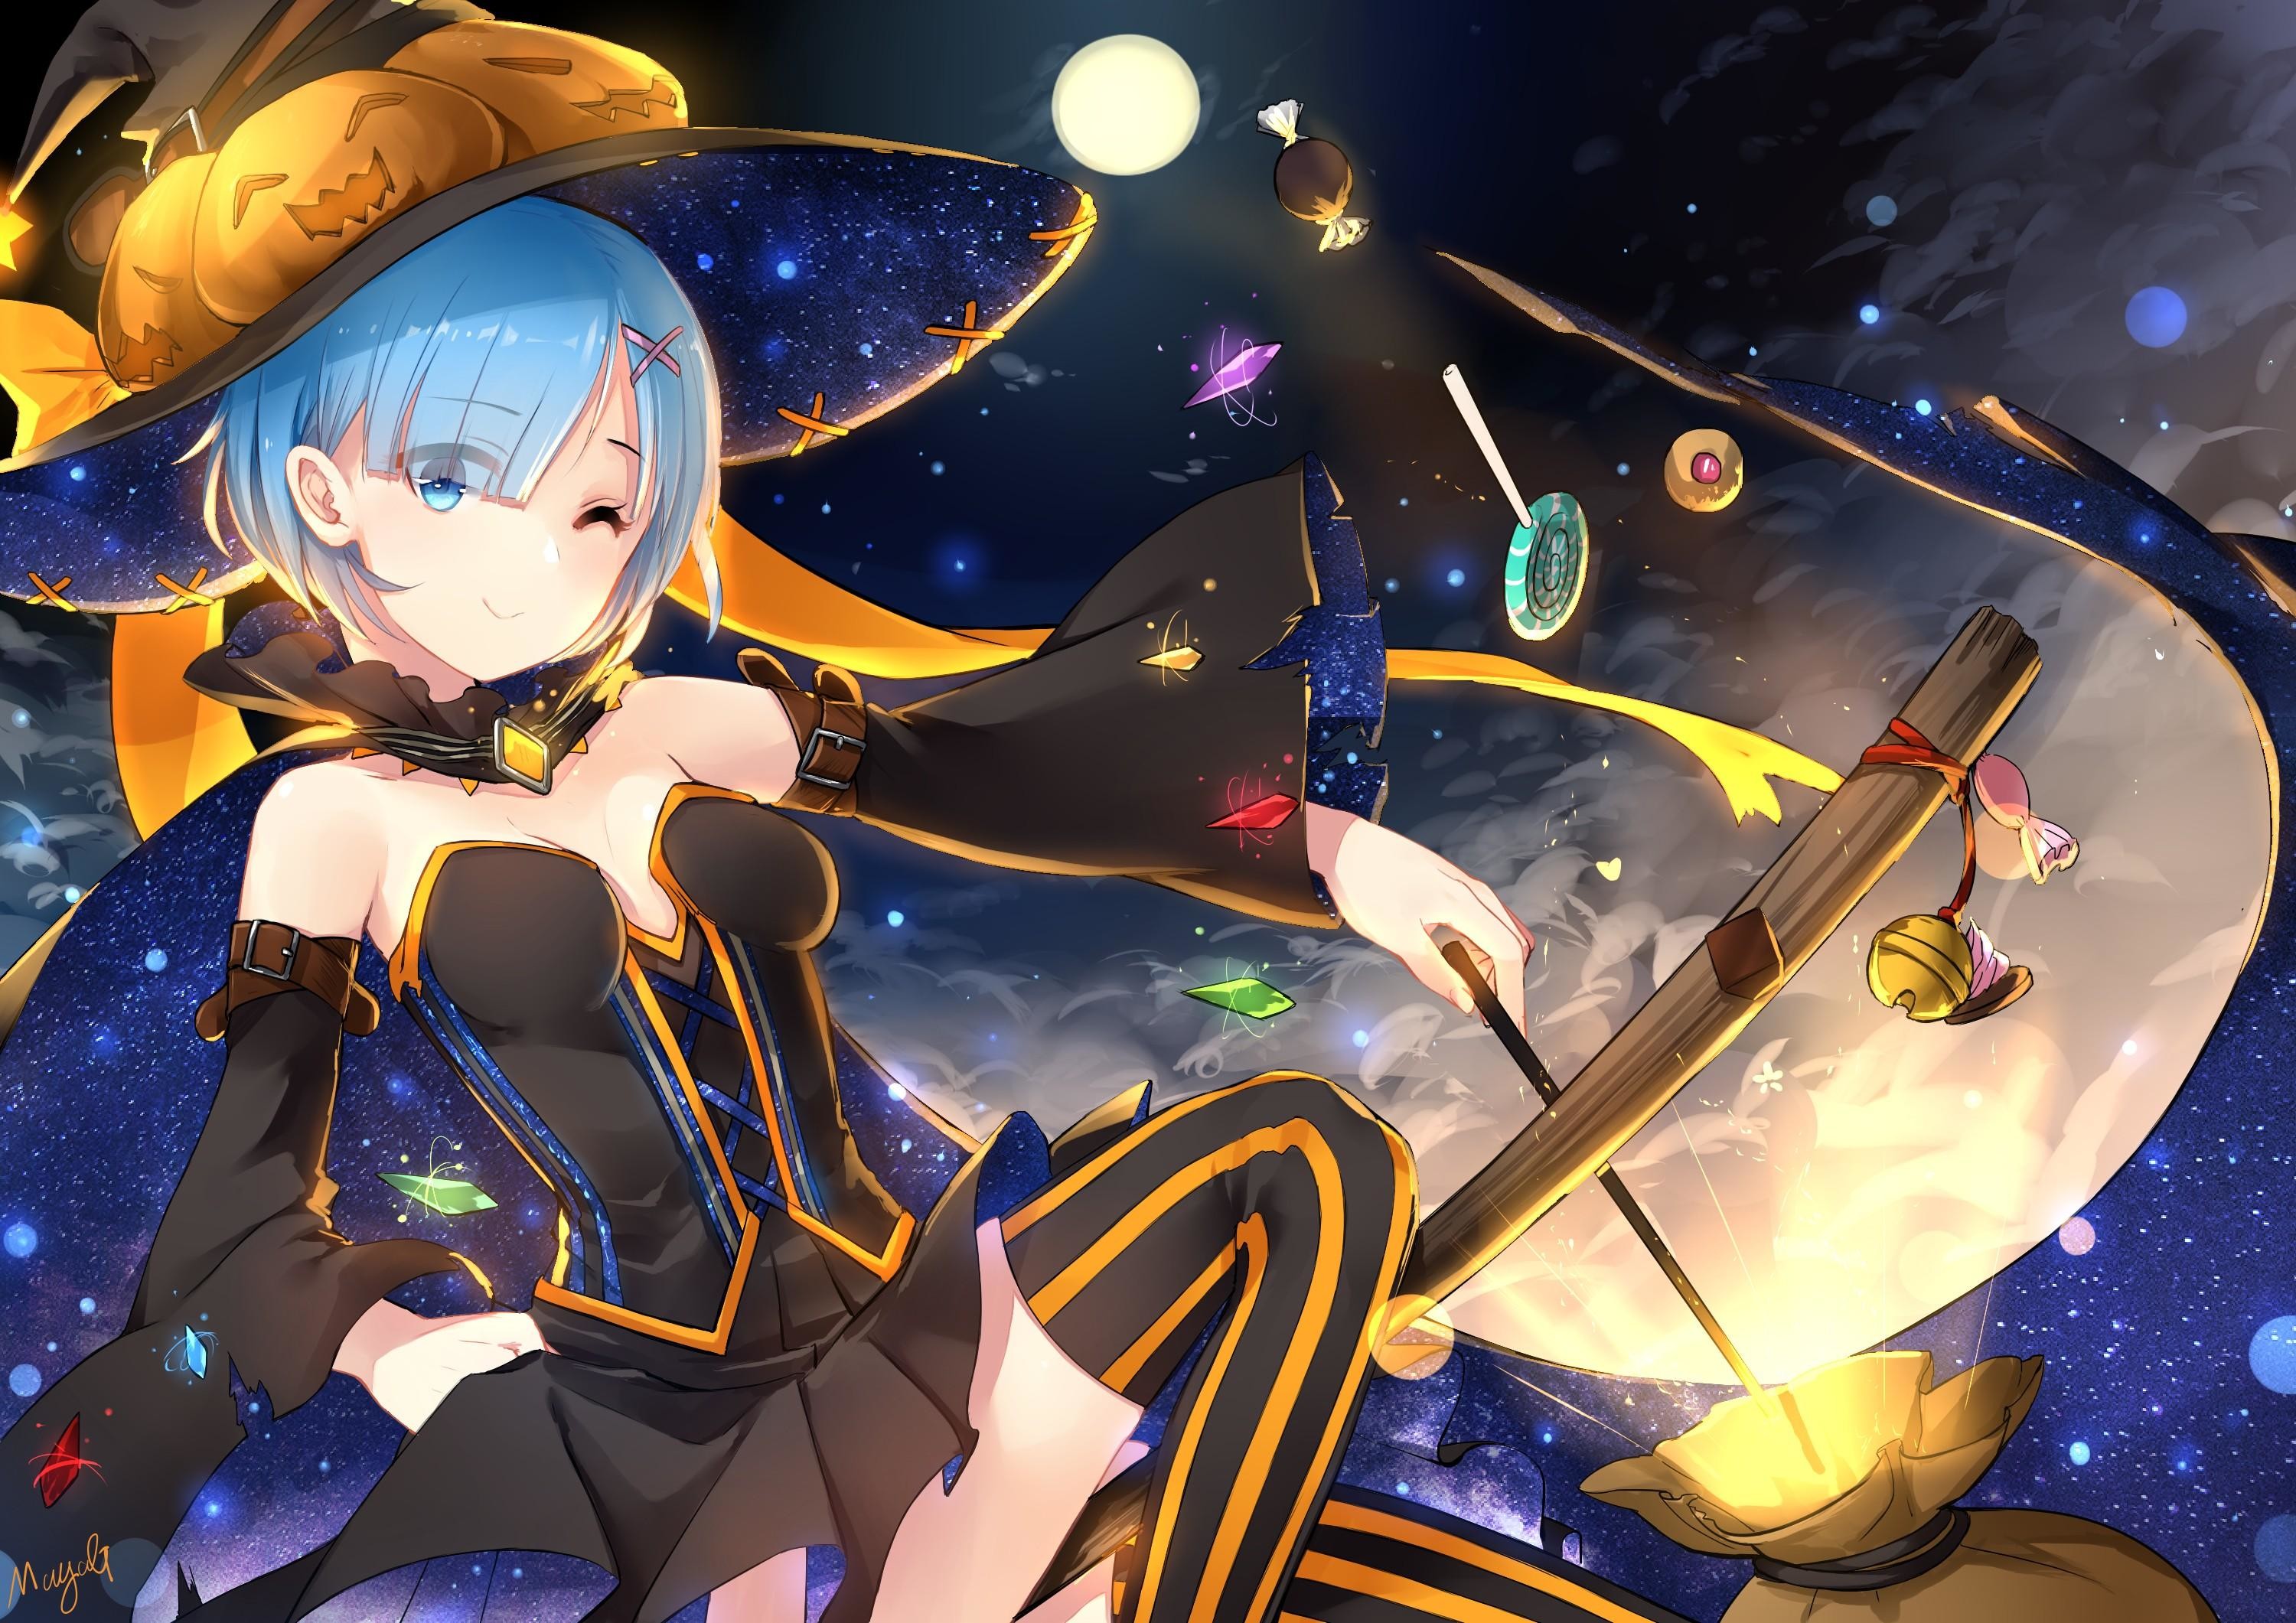 Halloween Anime For iPhone Wallpapers - Wallpaper Cave